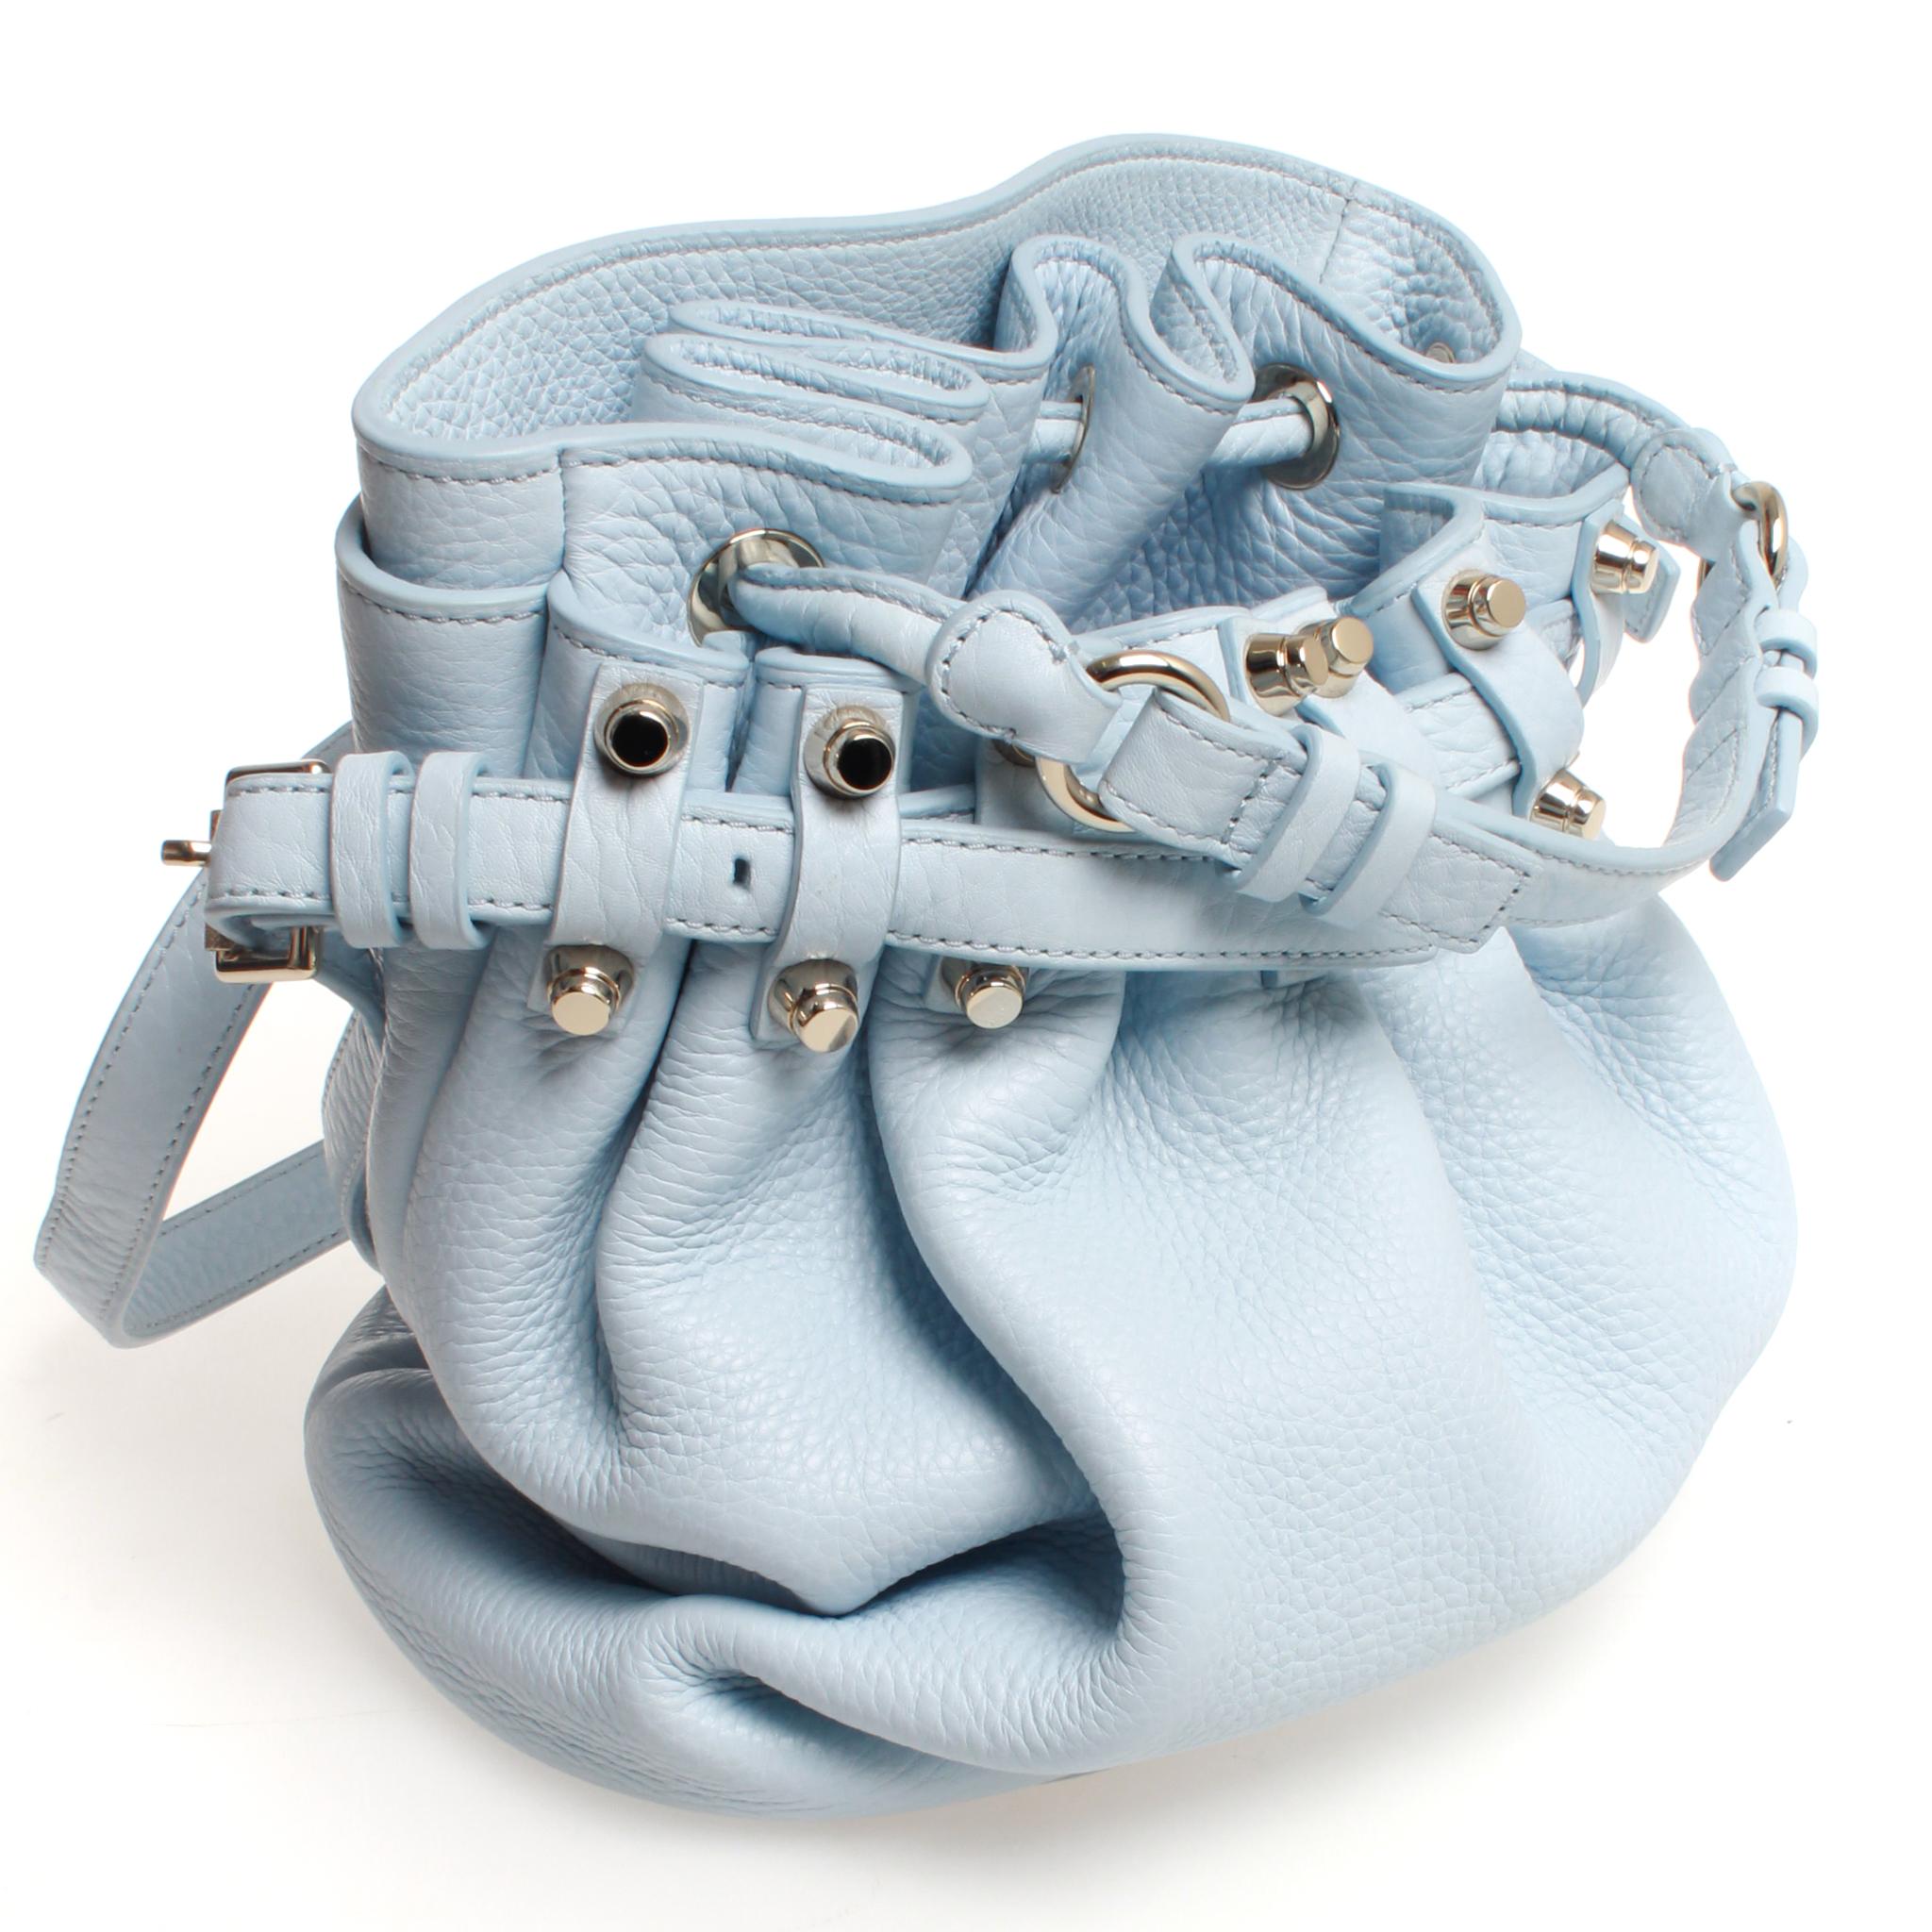 Buttery soft Alexander Wang Diego bucket bag with silver toned hardware. This bag features sky blue pebbled leather, lined interior with inner zip pocket, adjustable shoulder strap, silver hardware with silver studded feet to protect the base of the